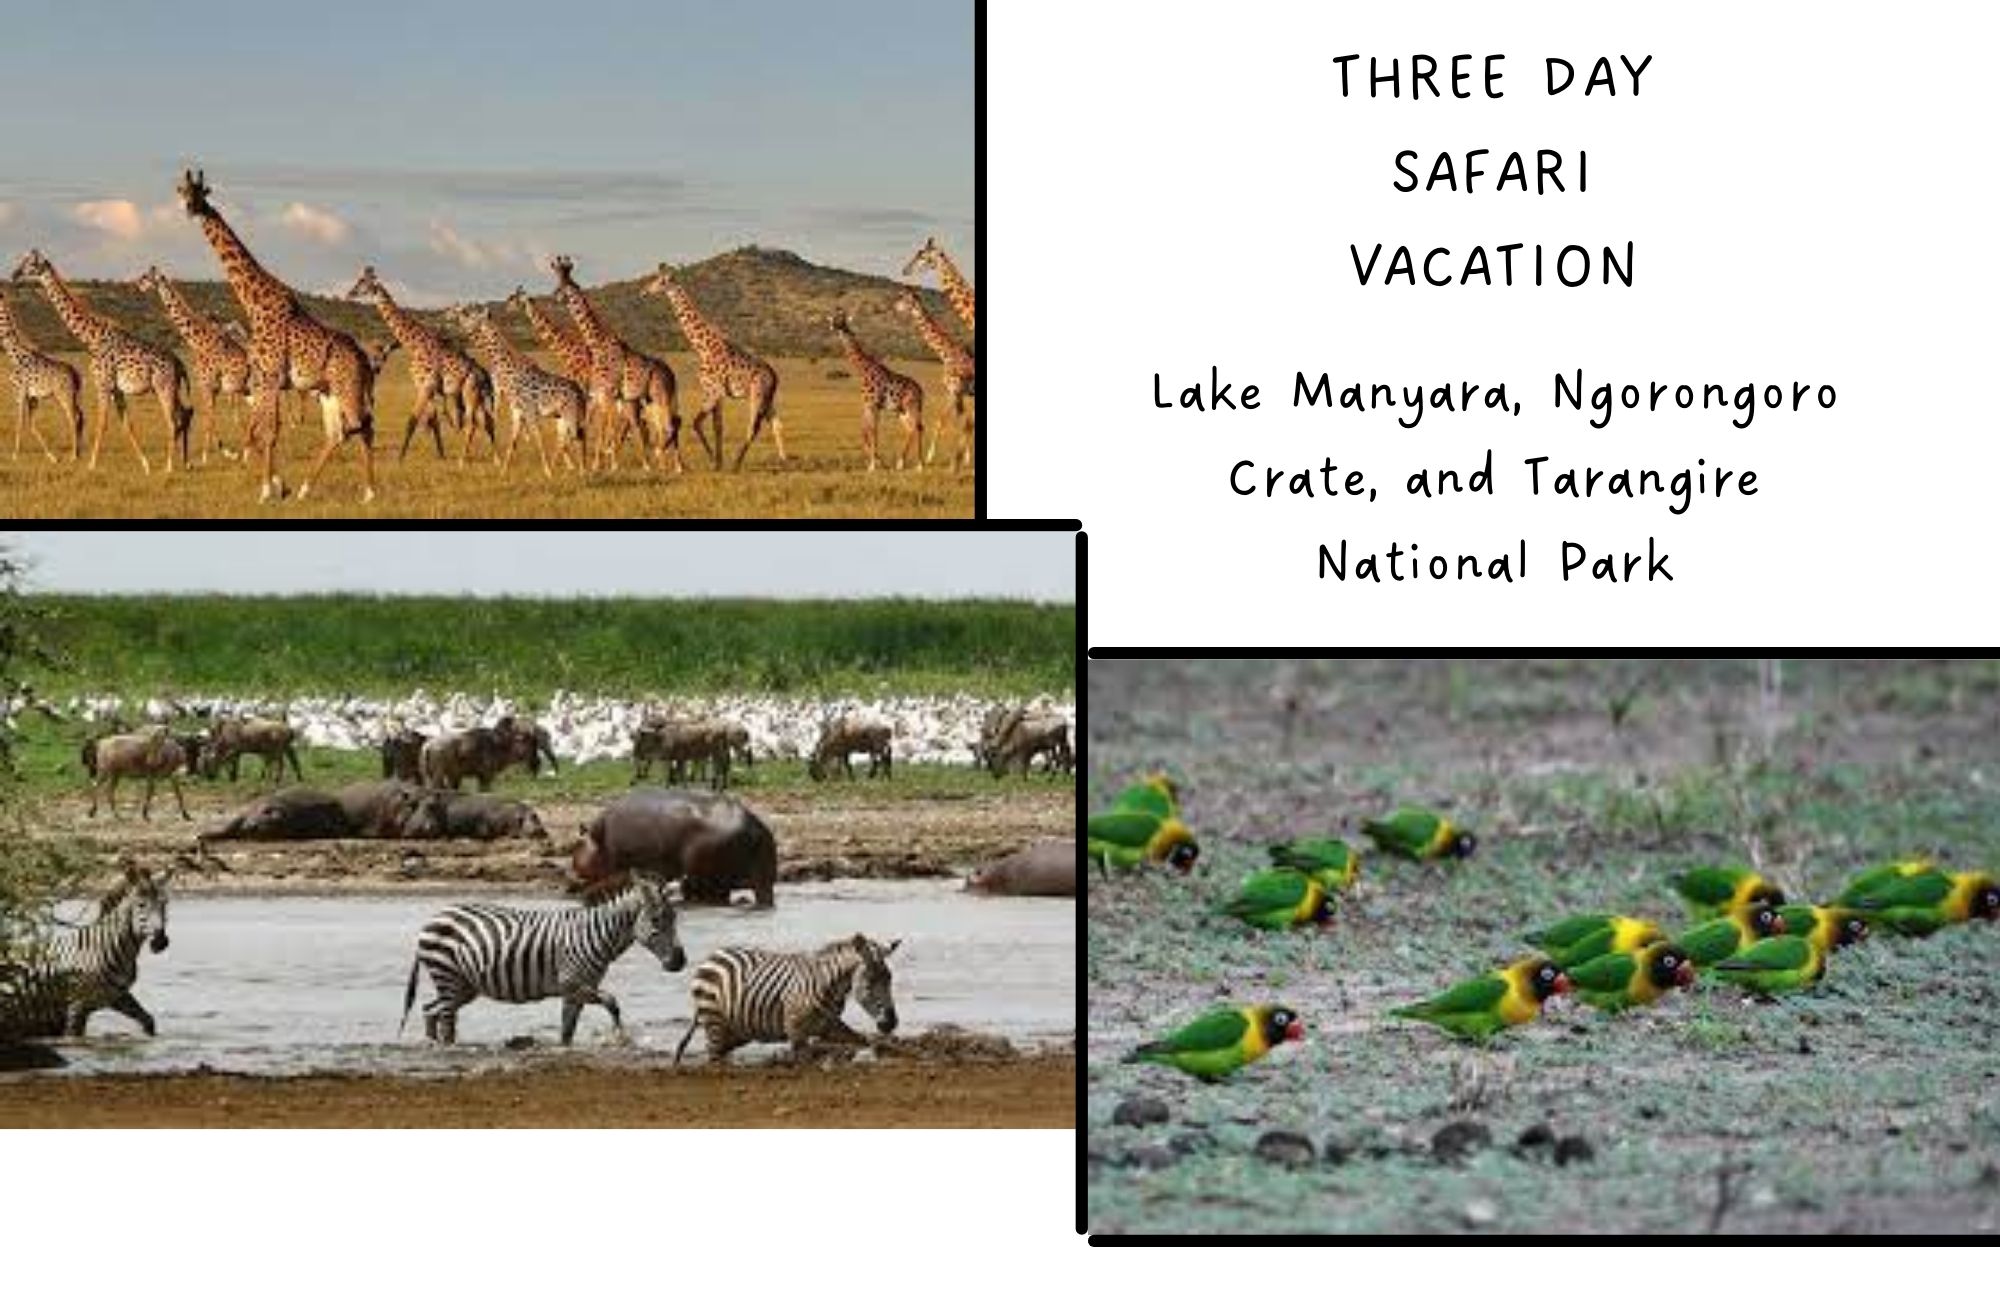 Lake Manyara with 12 girrafes walking in the upper left corner, the Ngorongoro Crater with zebras, hippopotamuses and wildebeest walking in the lower left corner, and the Tarangire National Park with 14 green and yellow birds